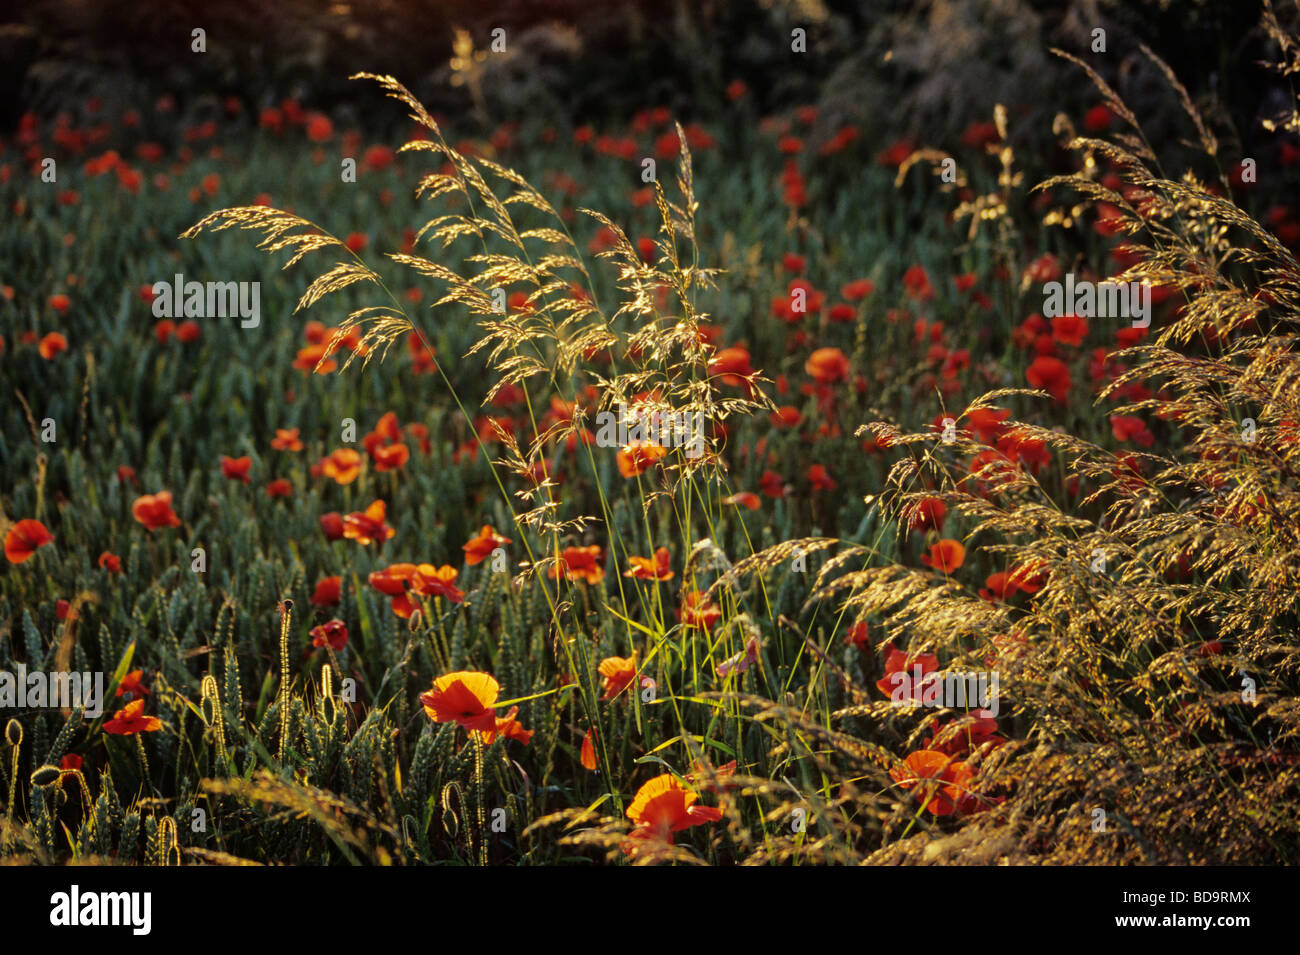 A field of poppies and wild grasses at Cleadon, Tyne and Wear, UK Stock Photo